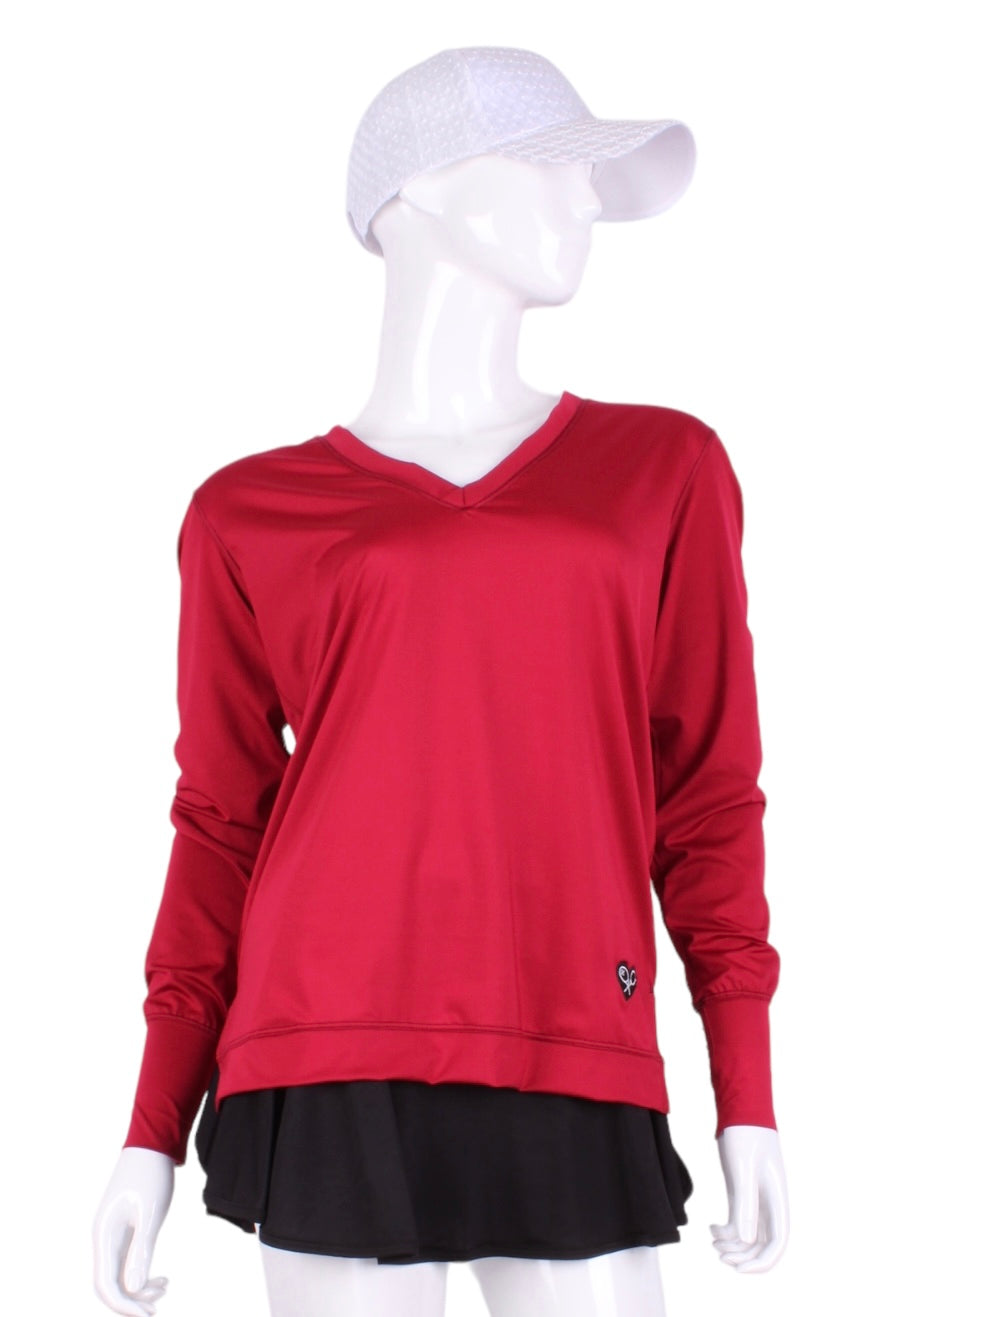 Raspberry Red Long Sleeve Very Vee Tee. This top is soooo gorgeous!    It’s called the Long Sleeve Very Vee Tee - because as you can see - the Vee is - well you know - VERY VEE!  For the tennis lady who loves to leave her chest open - but cover her arms (and other bits) this top is seductive in a sweet way!  You feel nearly naked in it.  So go ahead - hit that ace!  Flattering and free - that’s what this top is.  The most preppy of my tops - looks just as good tied around the shoulders as it does on.